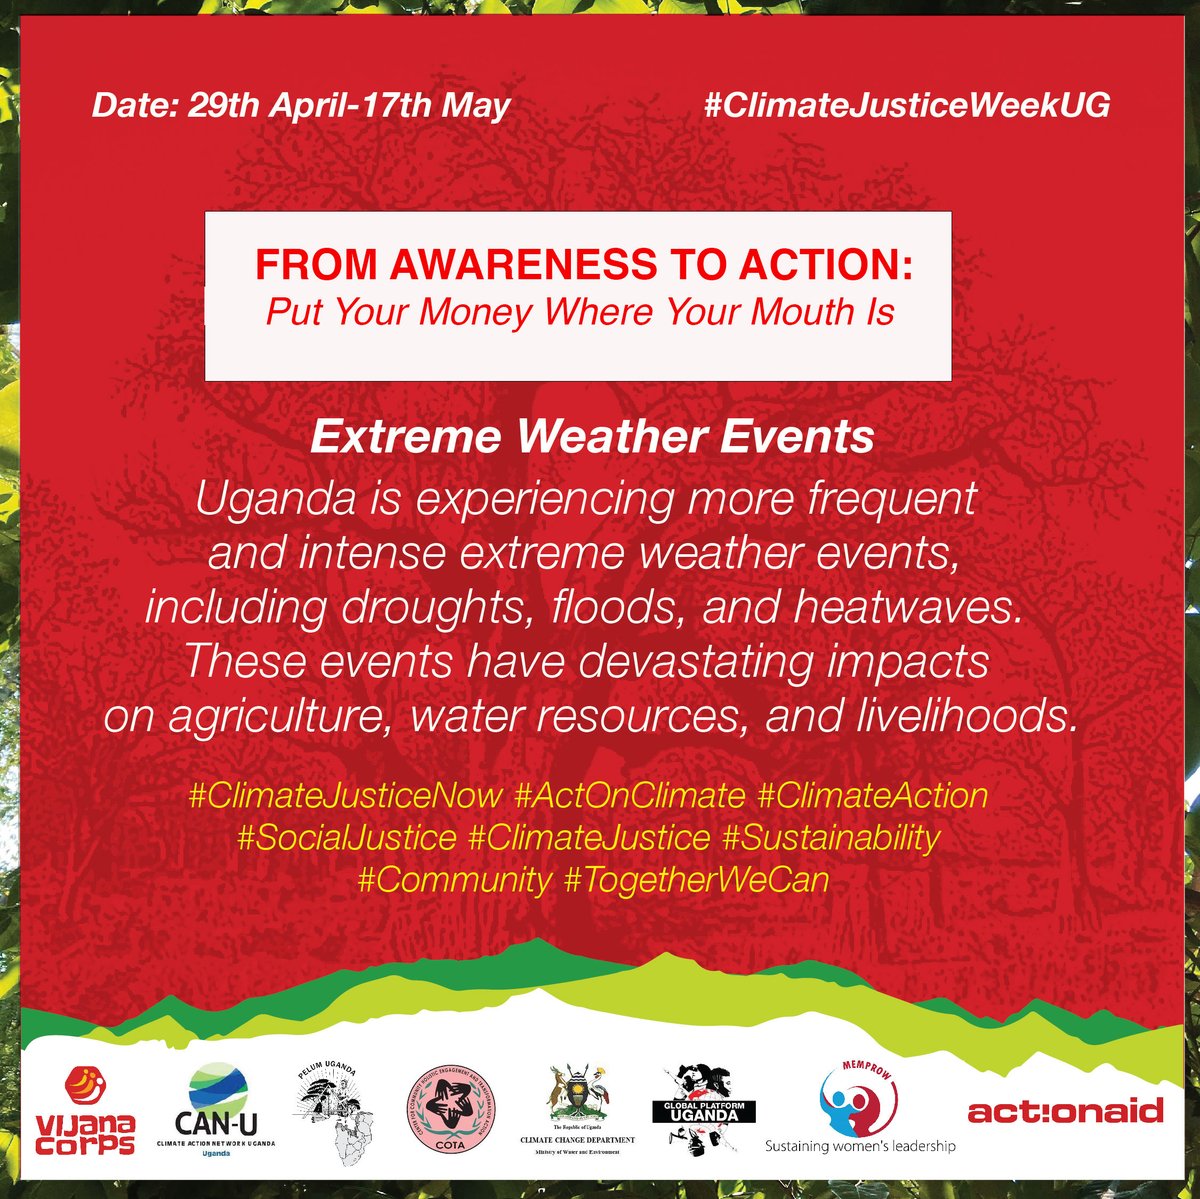 The climate crisis threatens livelihoods in Uganda and worldwide. Let’s stand up together during the Climate Justice Week to secure a sustainable future for everyone.
#ClimateJusticeWeekUg #FixtheFinance #FundOurFuture